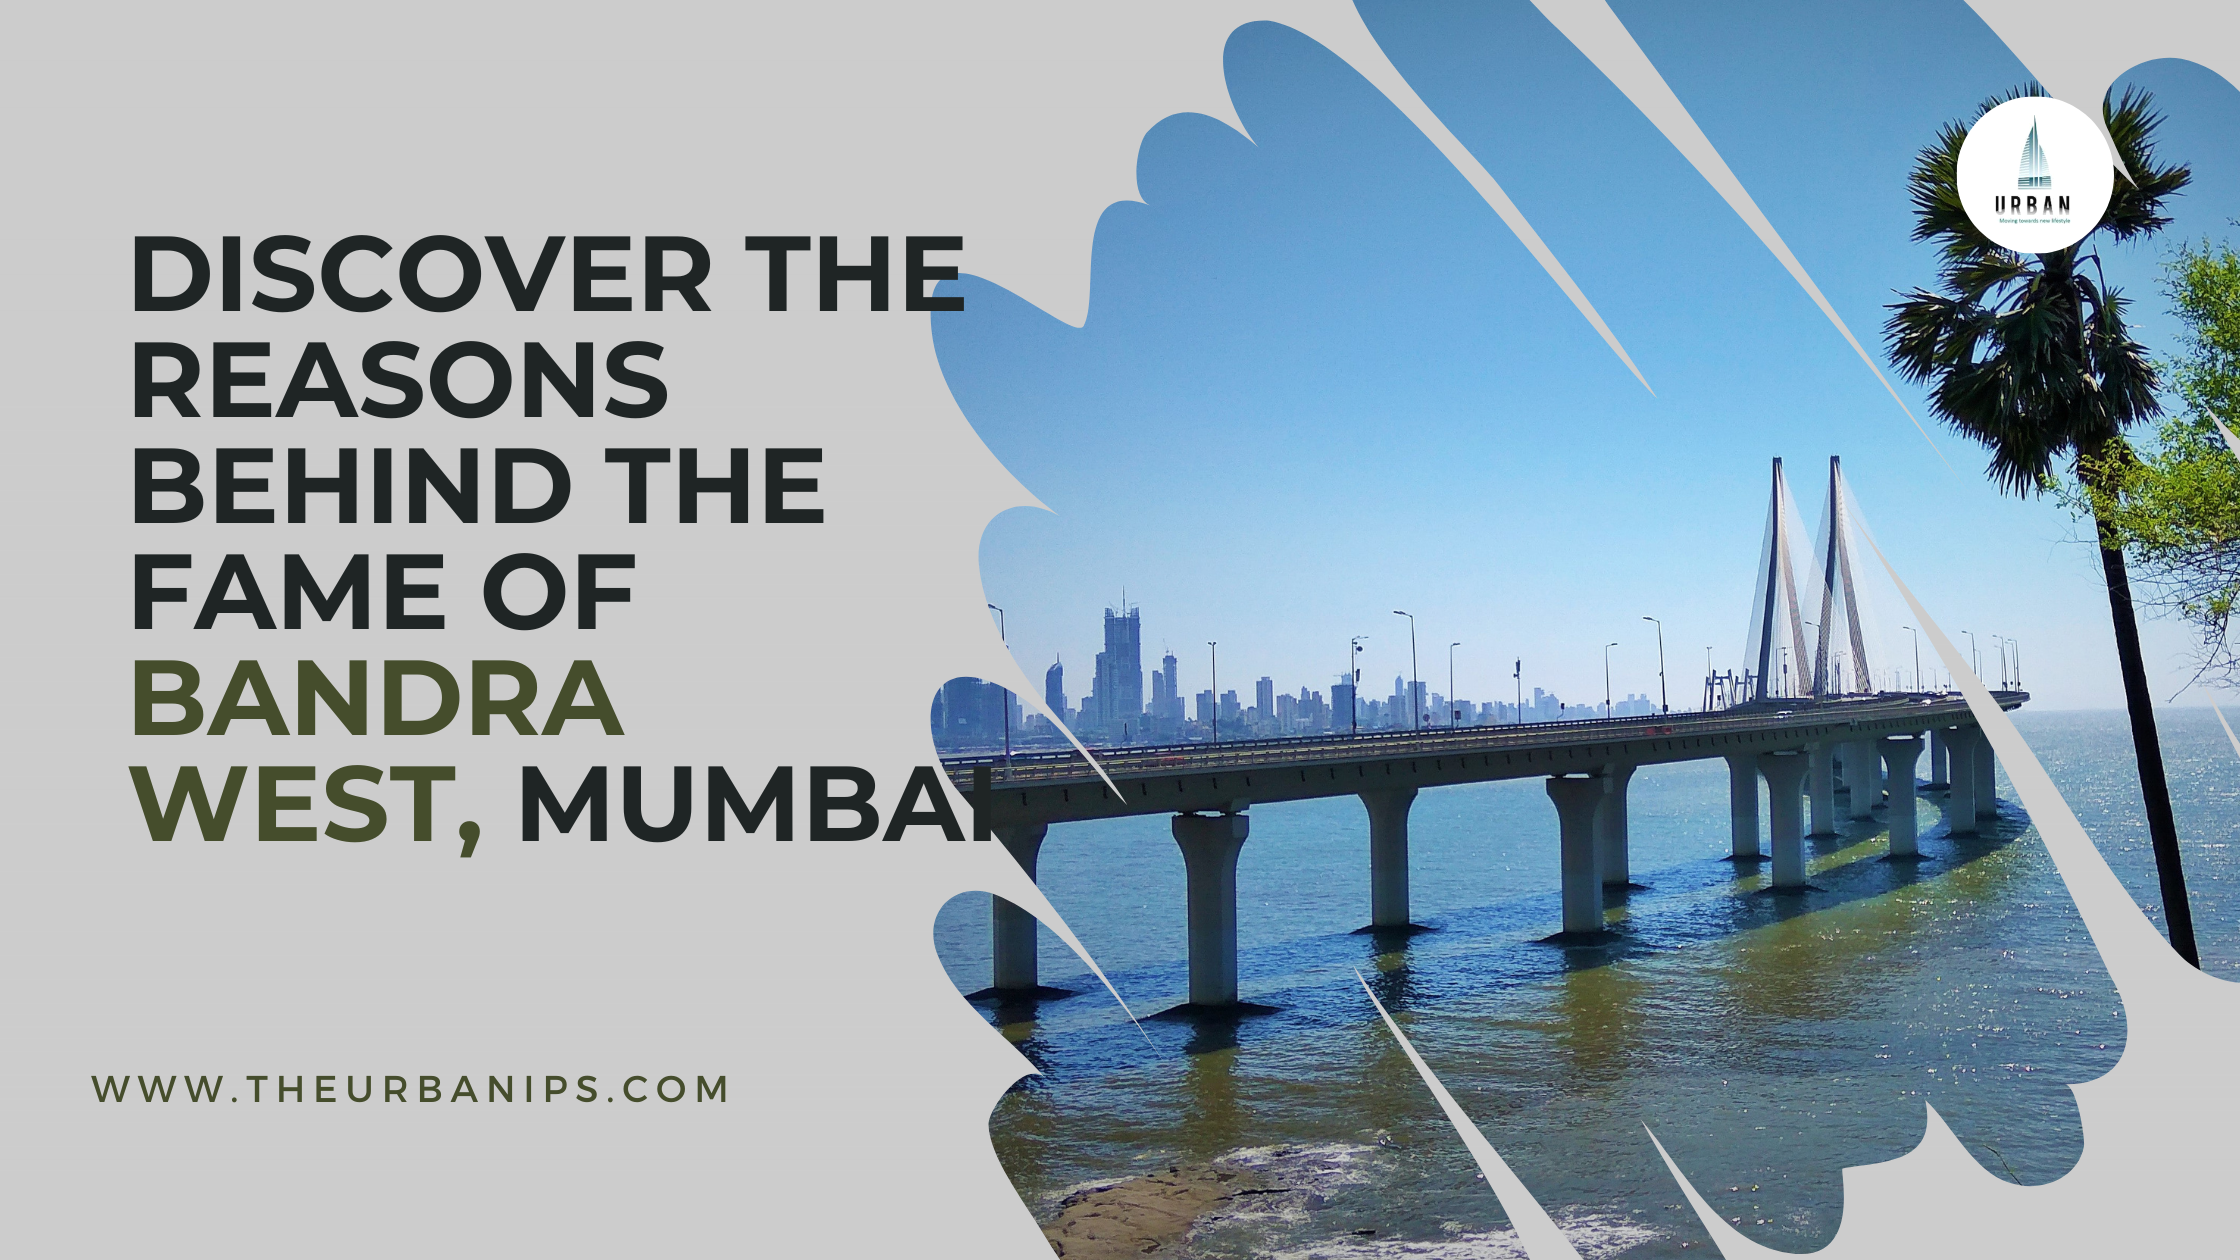 discover-the-reasons-behind-the-fame-of-bandra-west-mumbai-2